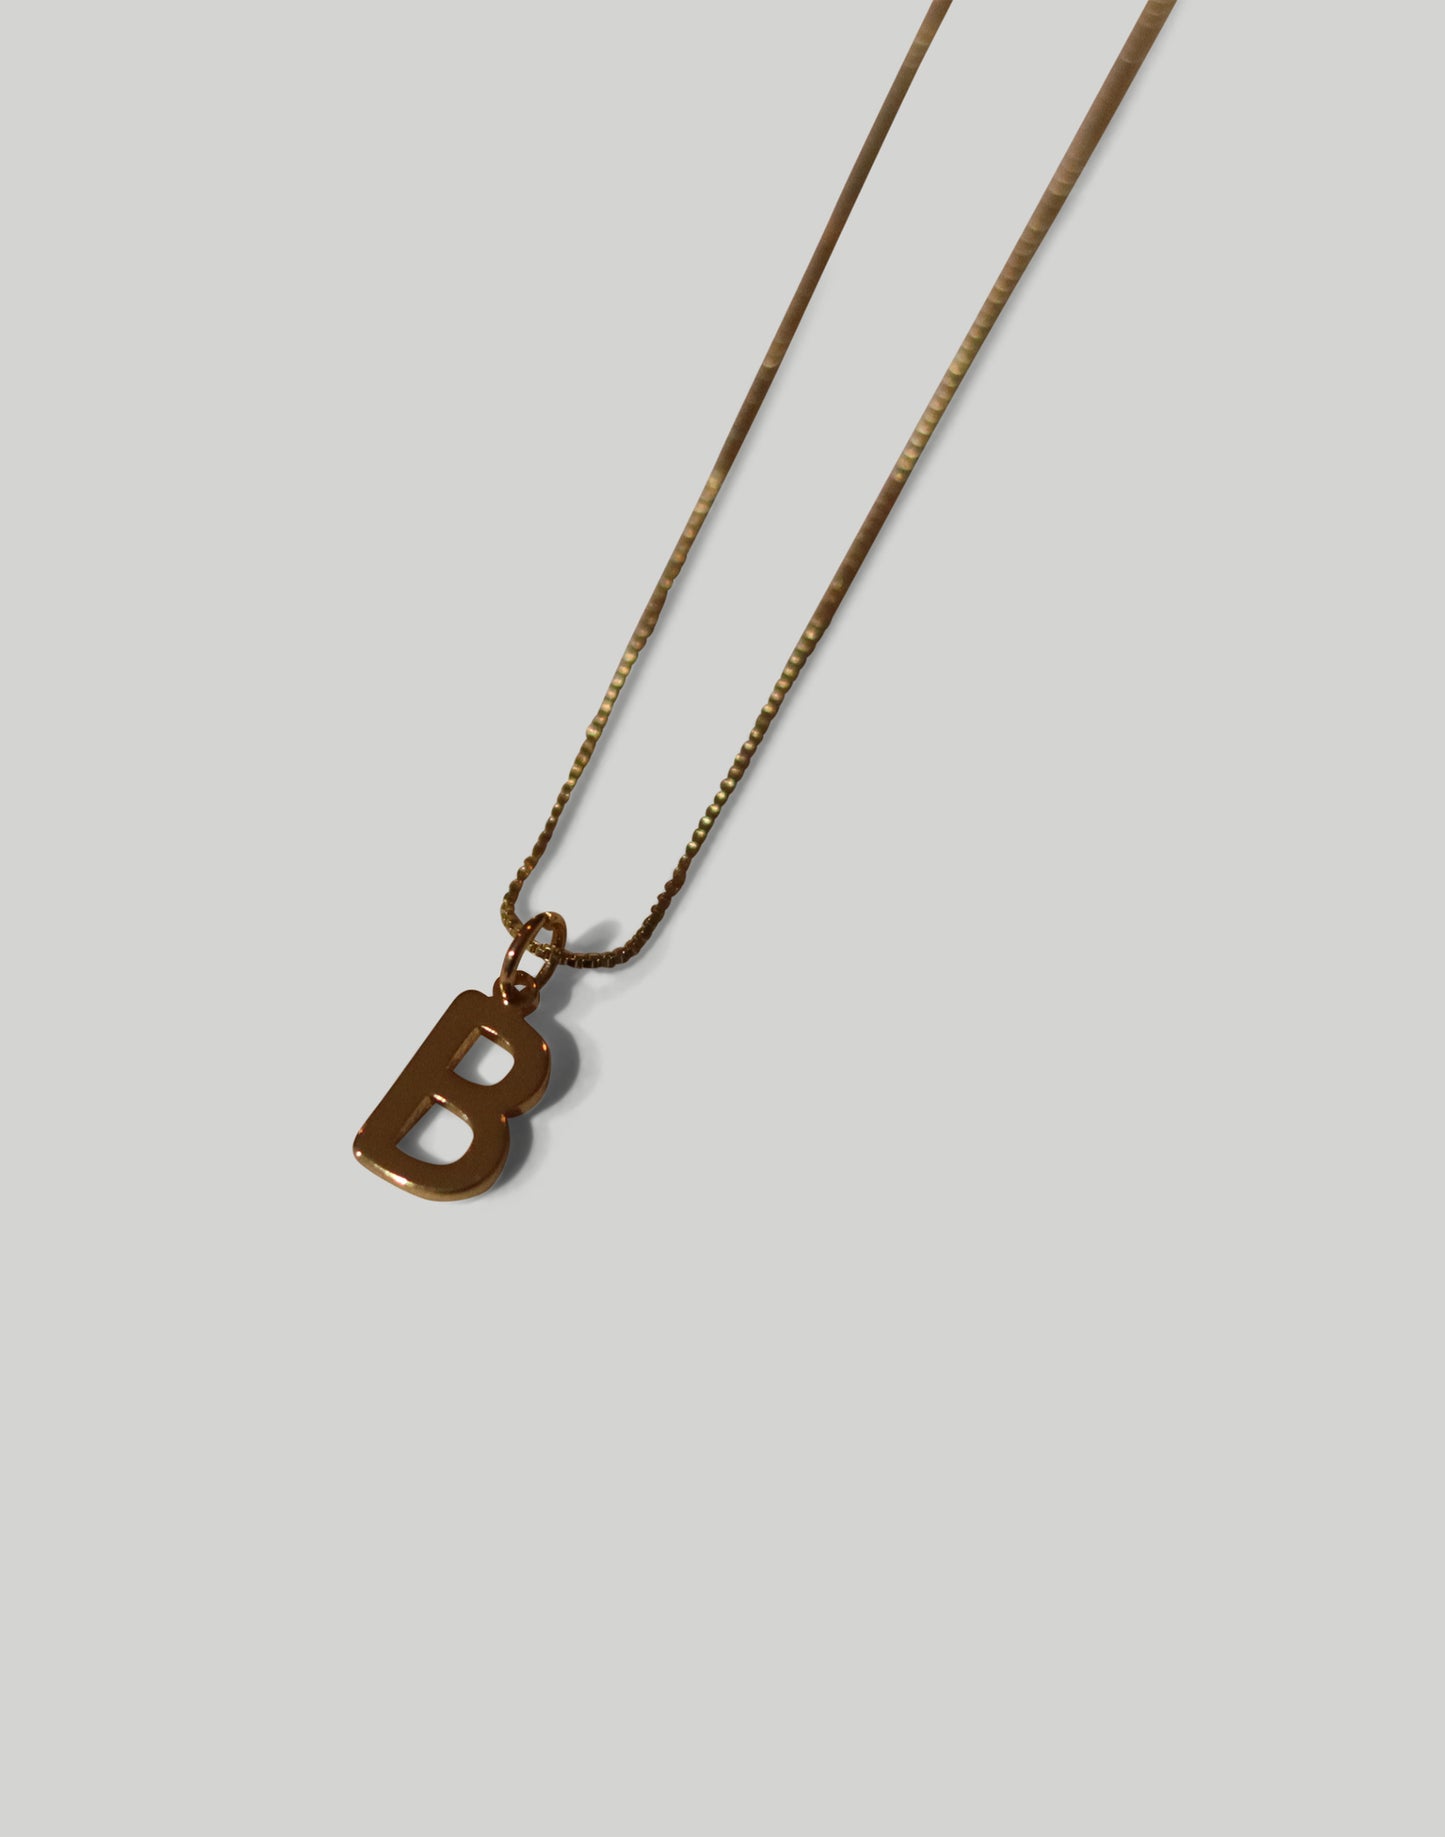 The Initial Minimalist Necklace